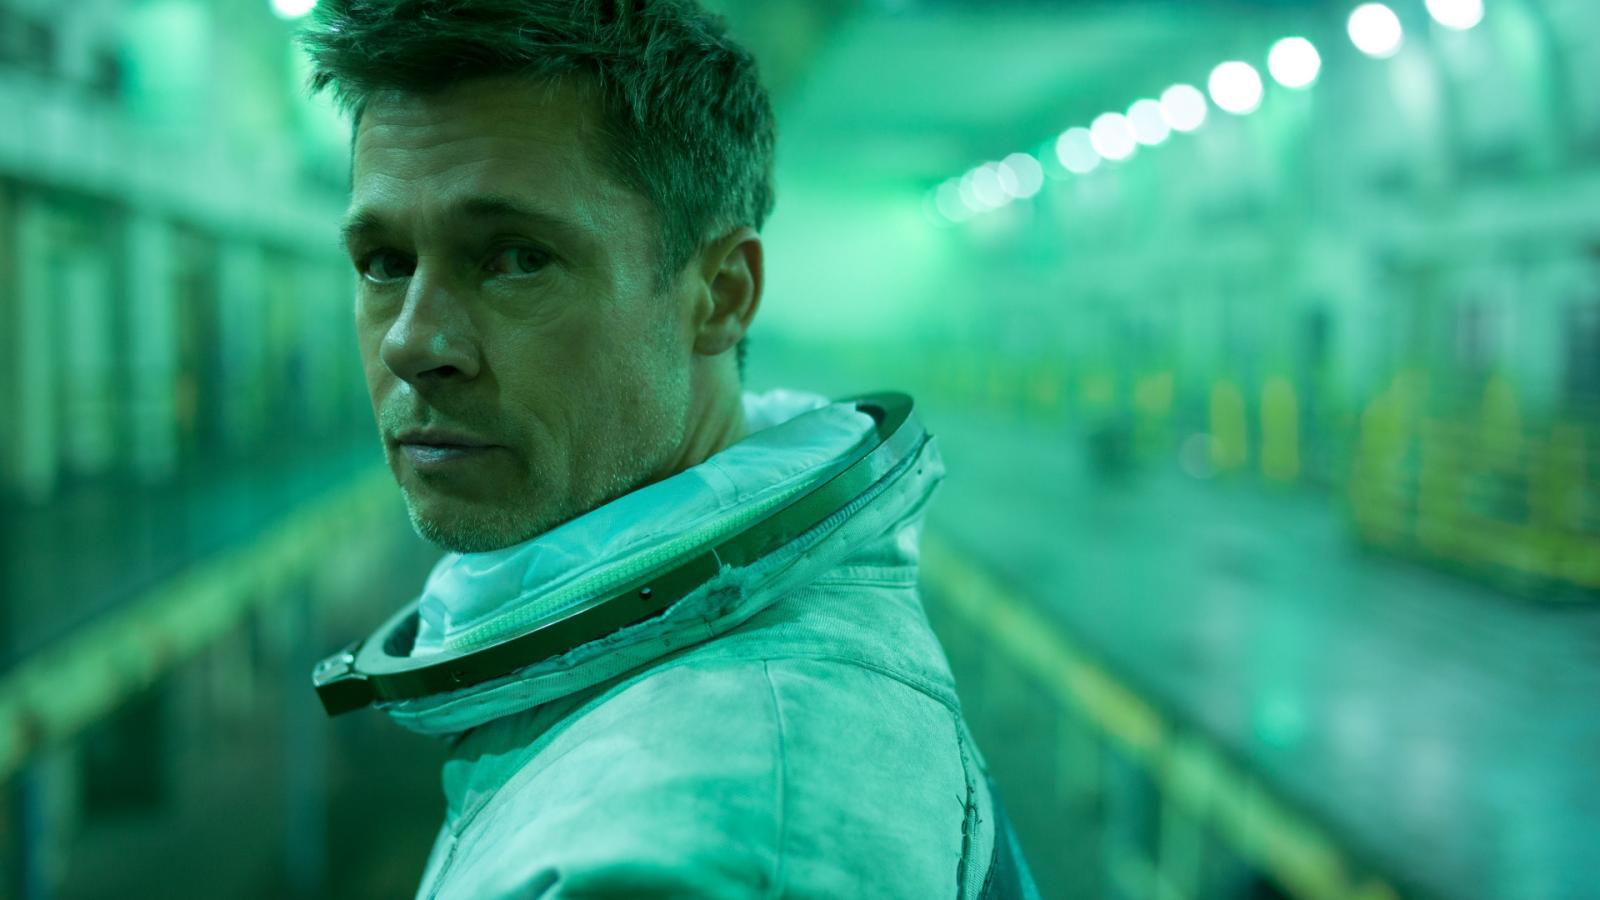 13 Films That Tried (and Failed) to Become the Next Interstellar - image 11